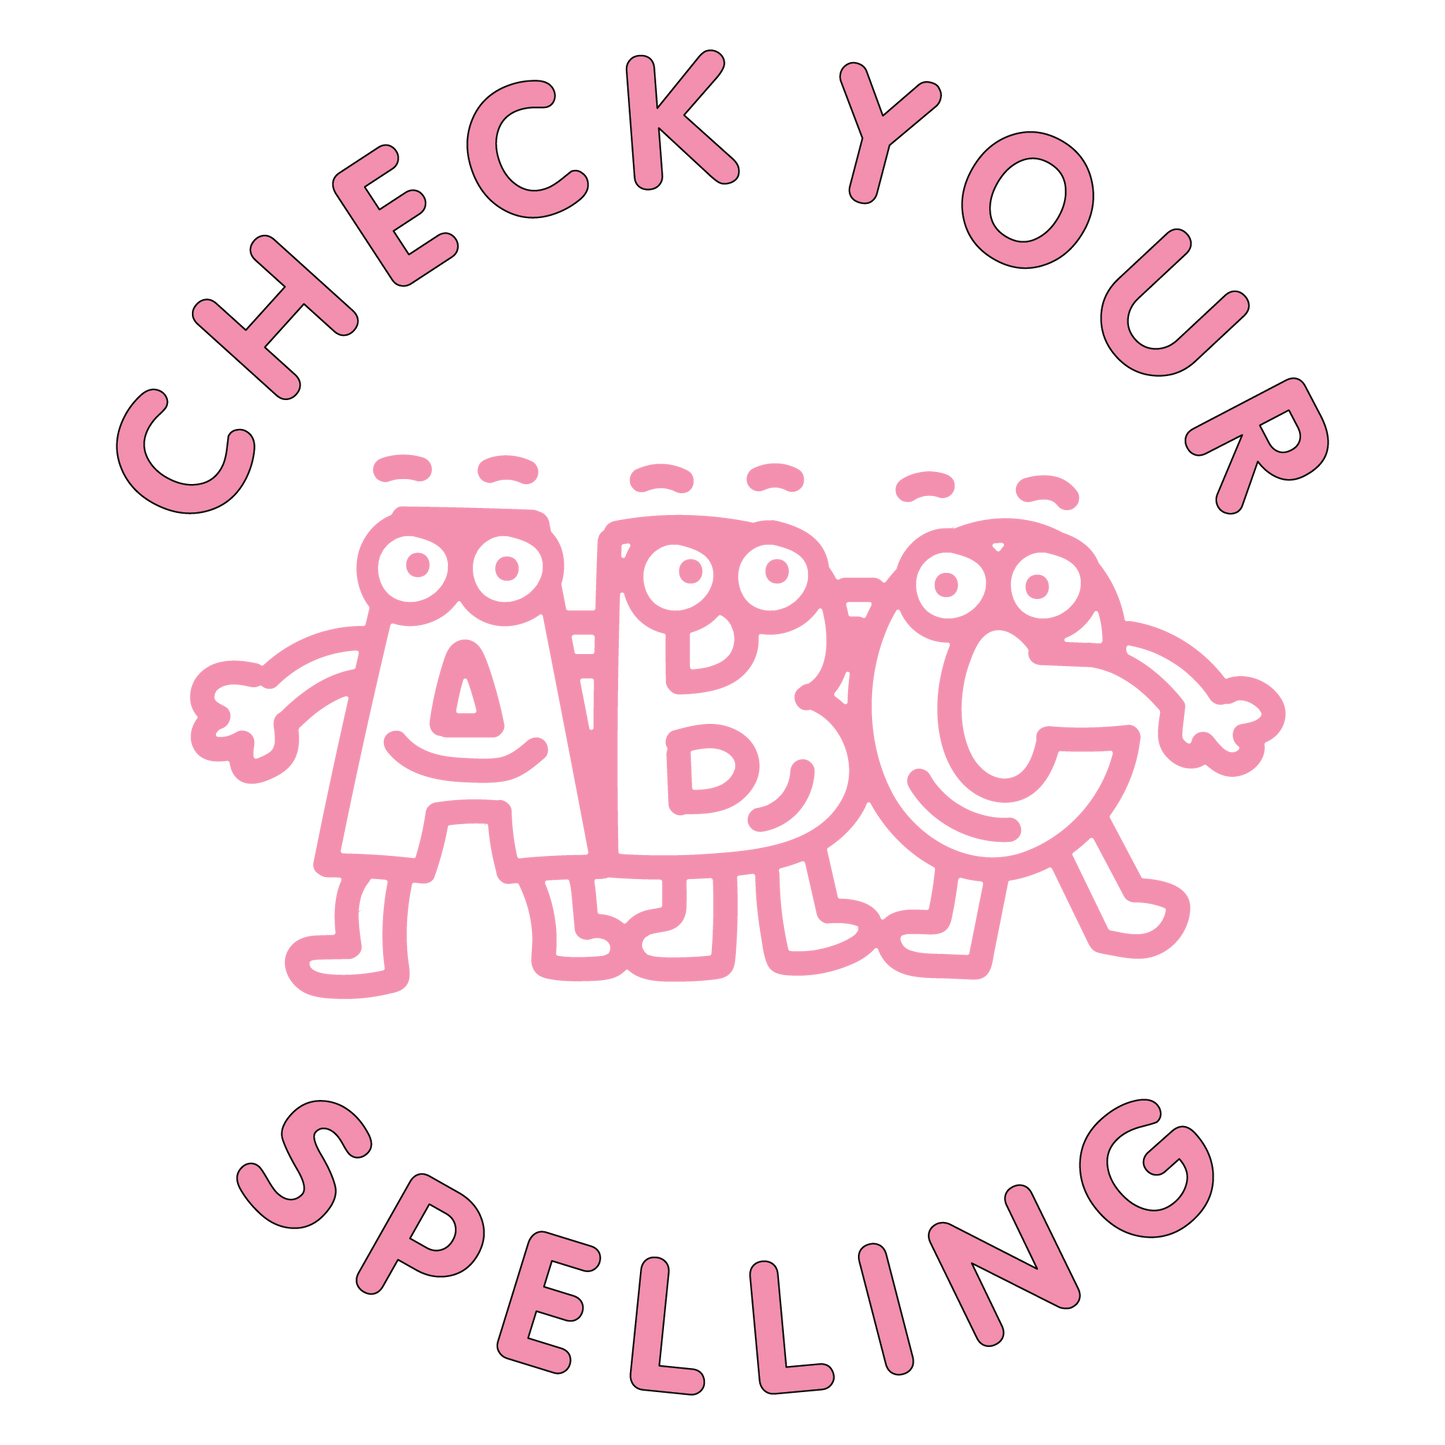 CHECK YOUR SPELLING STAMP